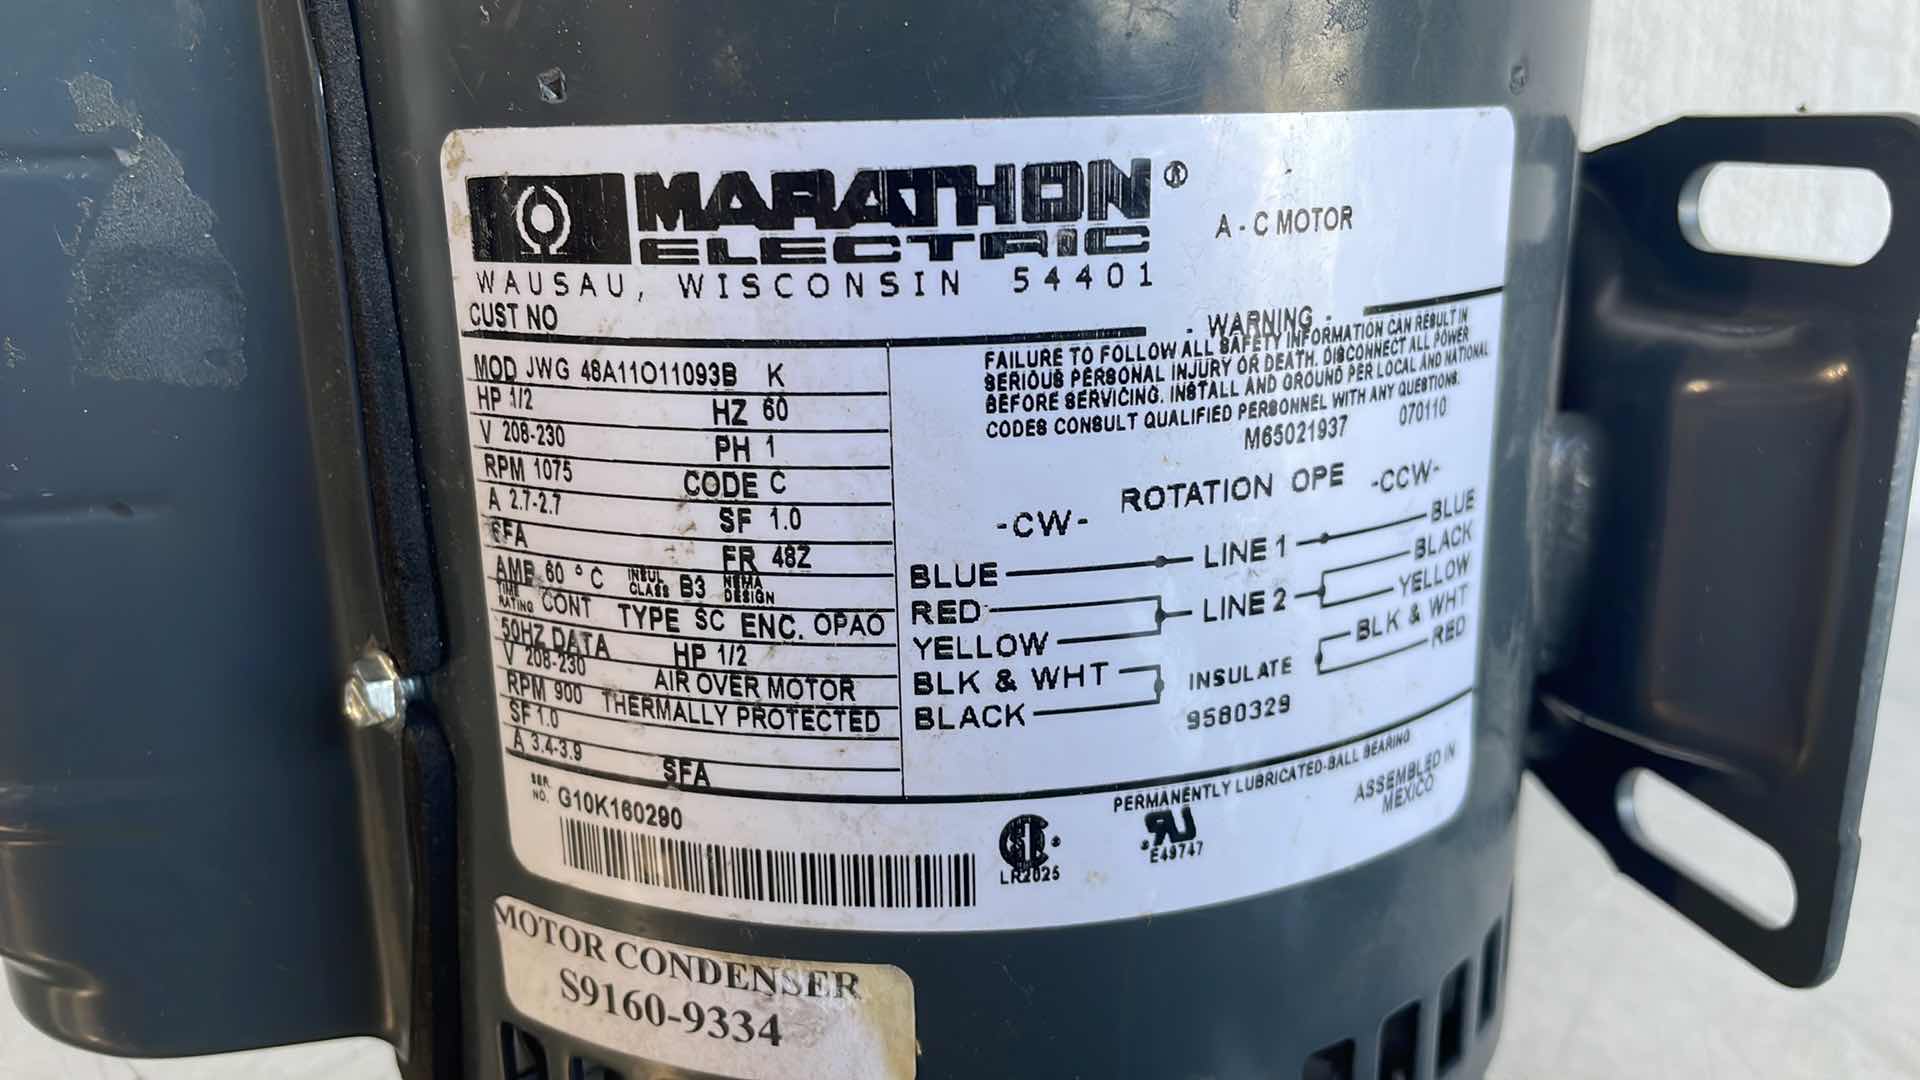 Photo 2 of MARATHON ELECTRIC A-C MOTOR SPECS IN PICTURES